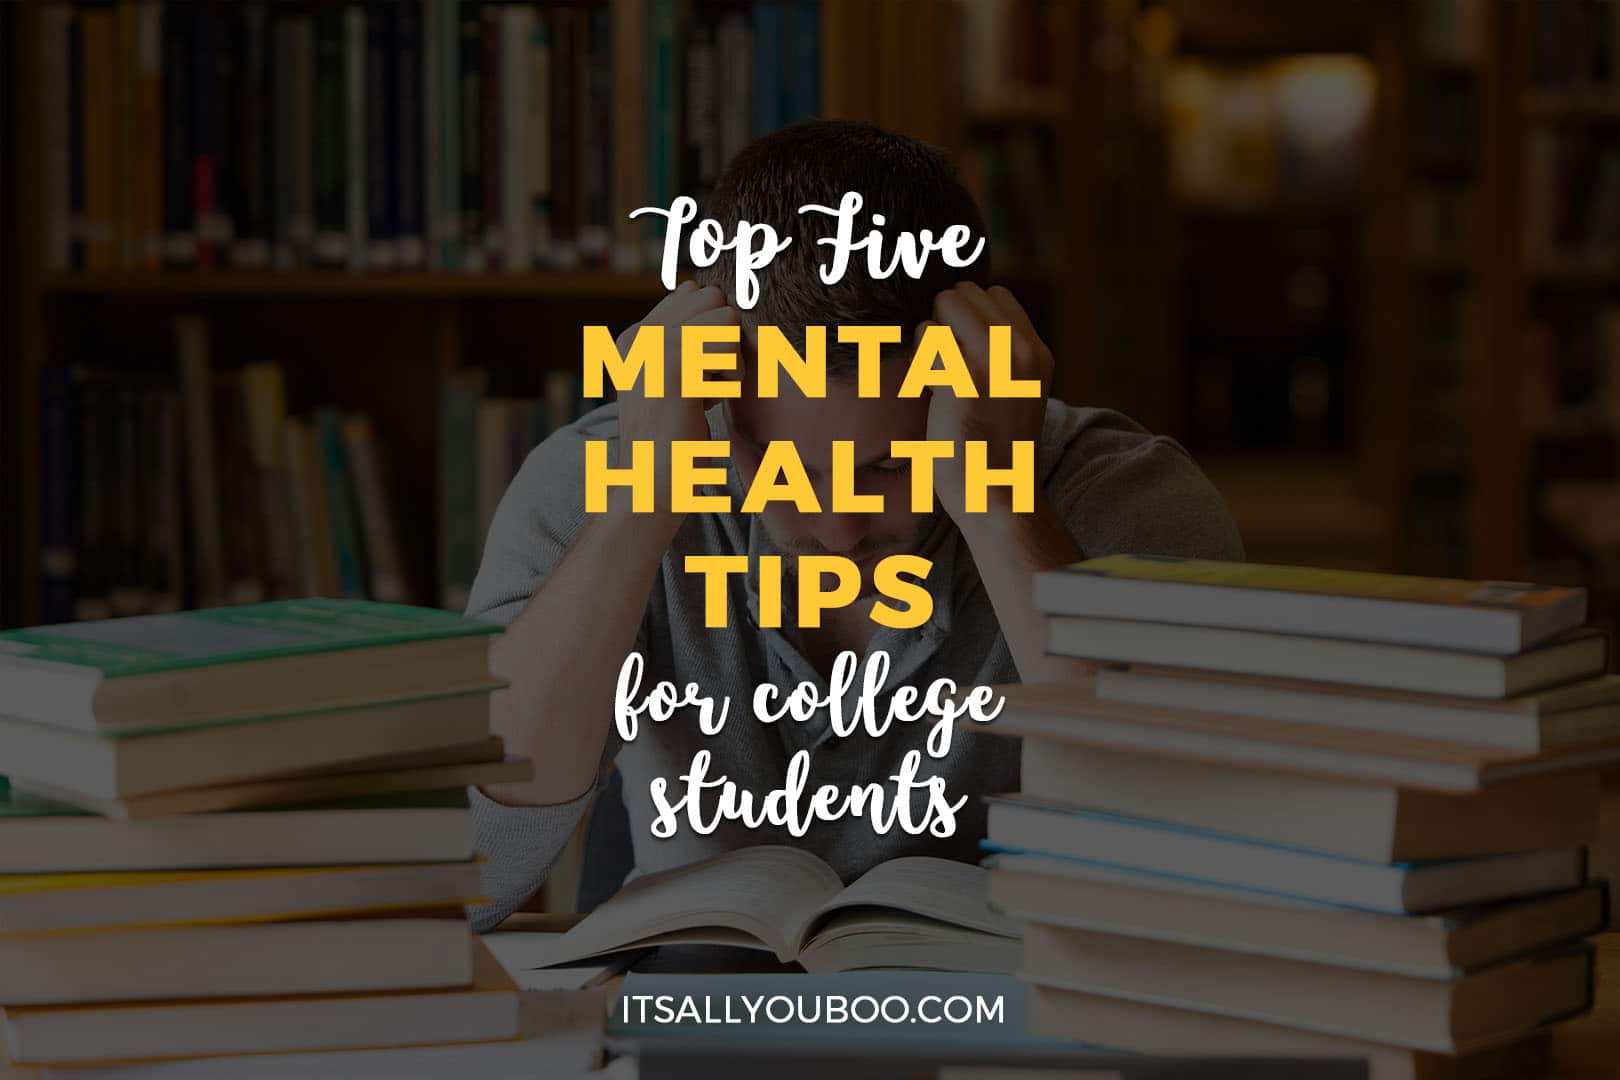 Top 5 Mental Health Tips for College Students